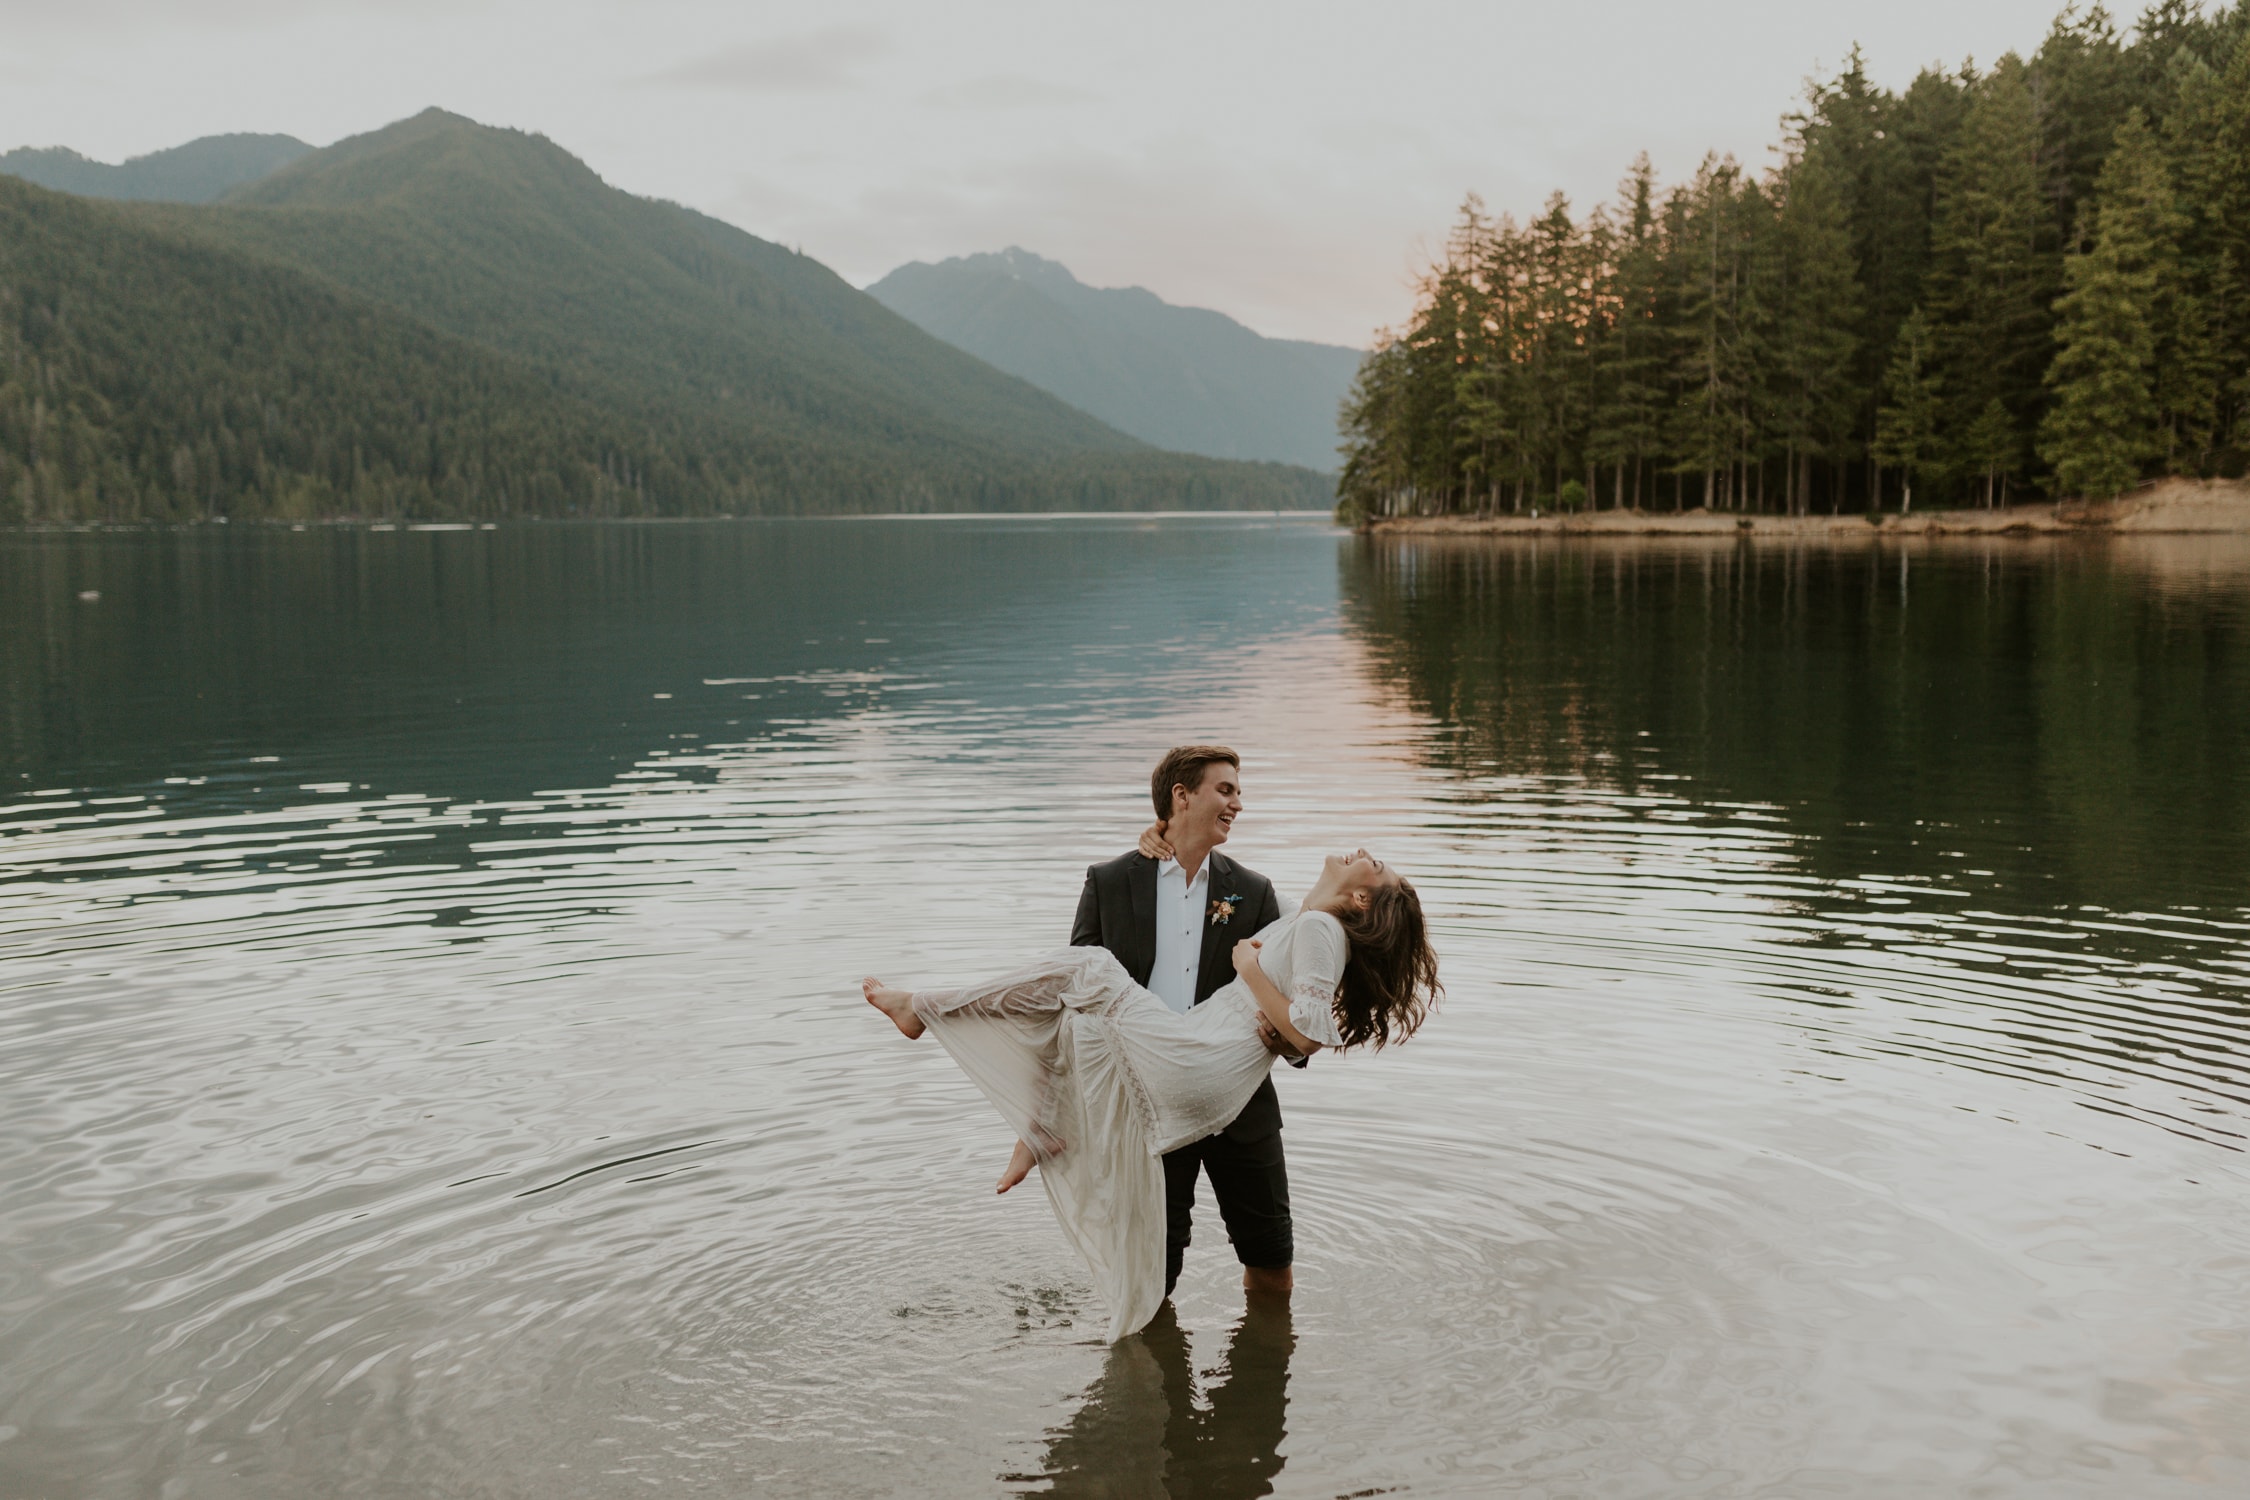 A bride and groom laughing in Lake Cushman on their wedding day.